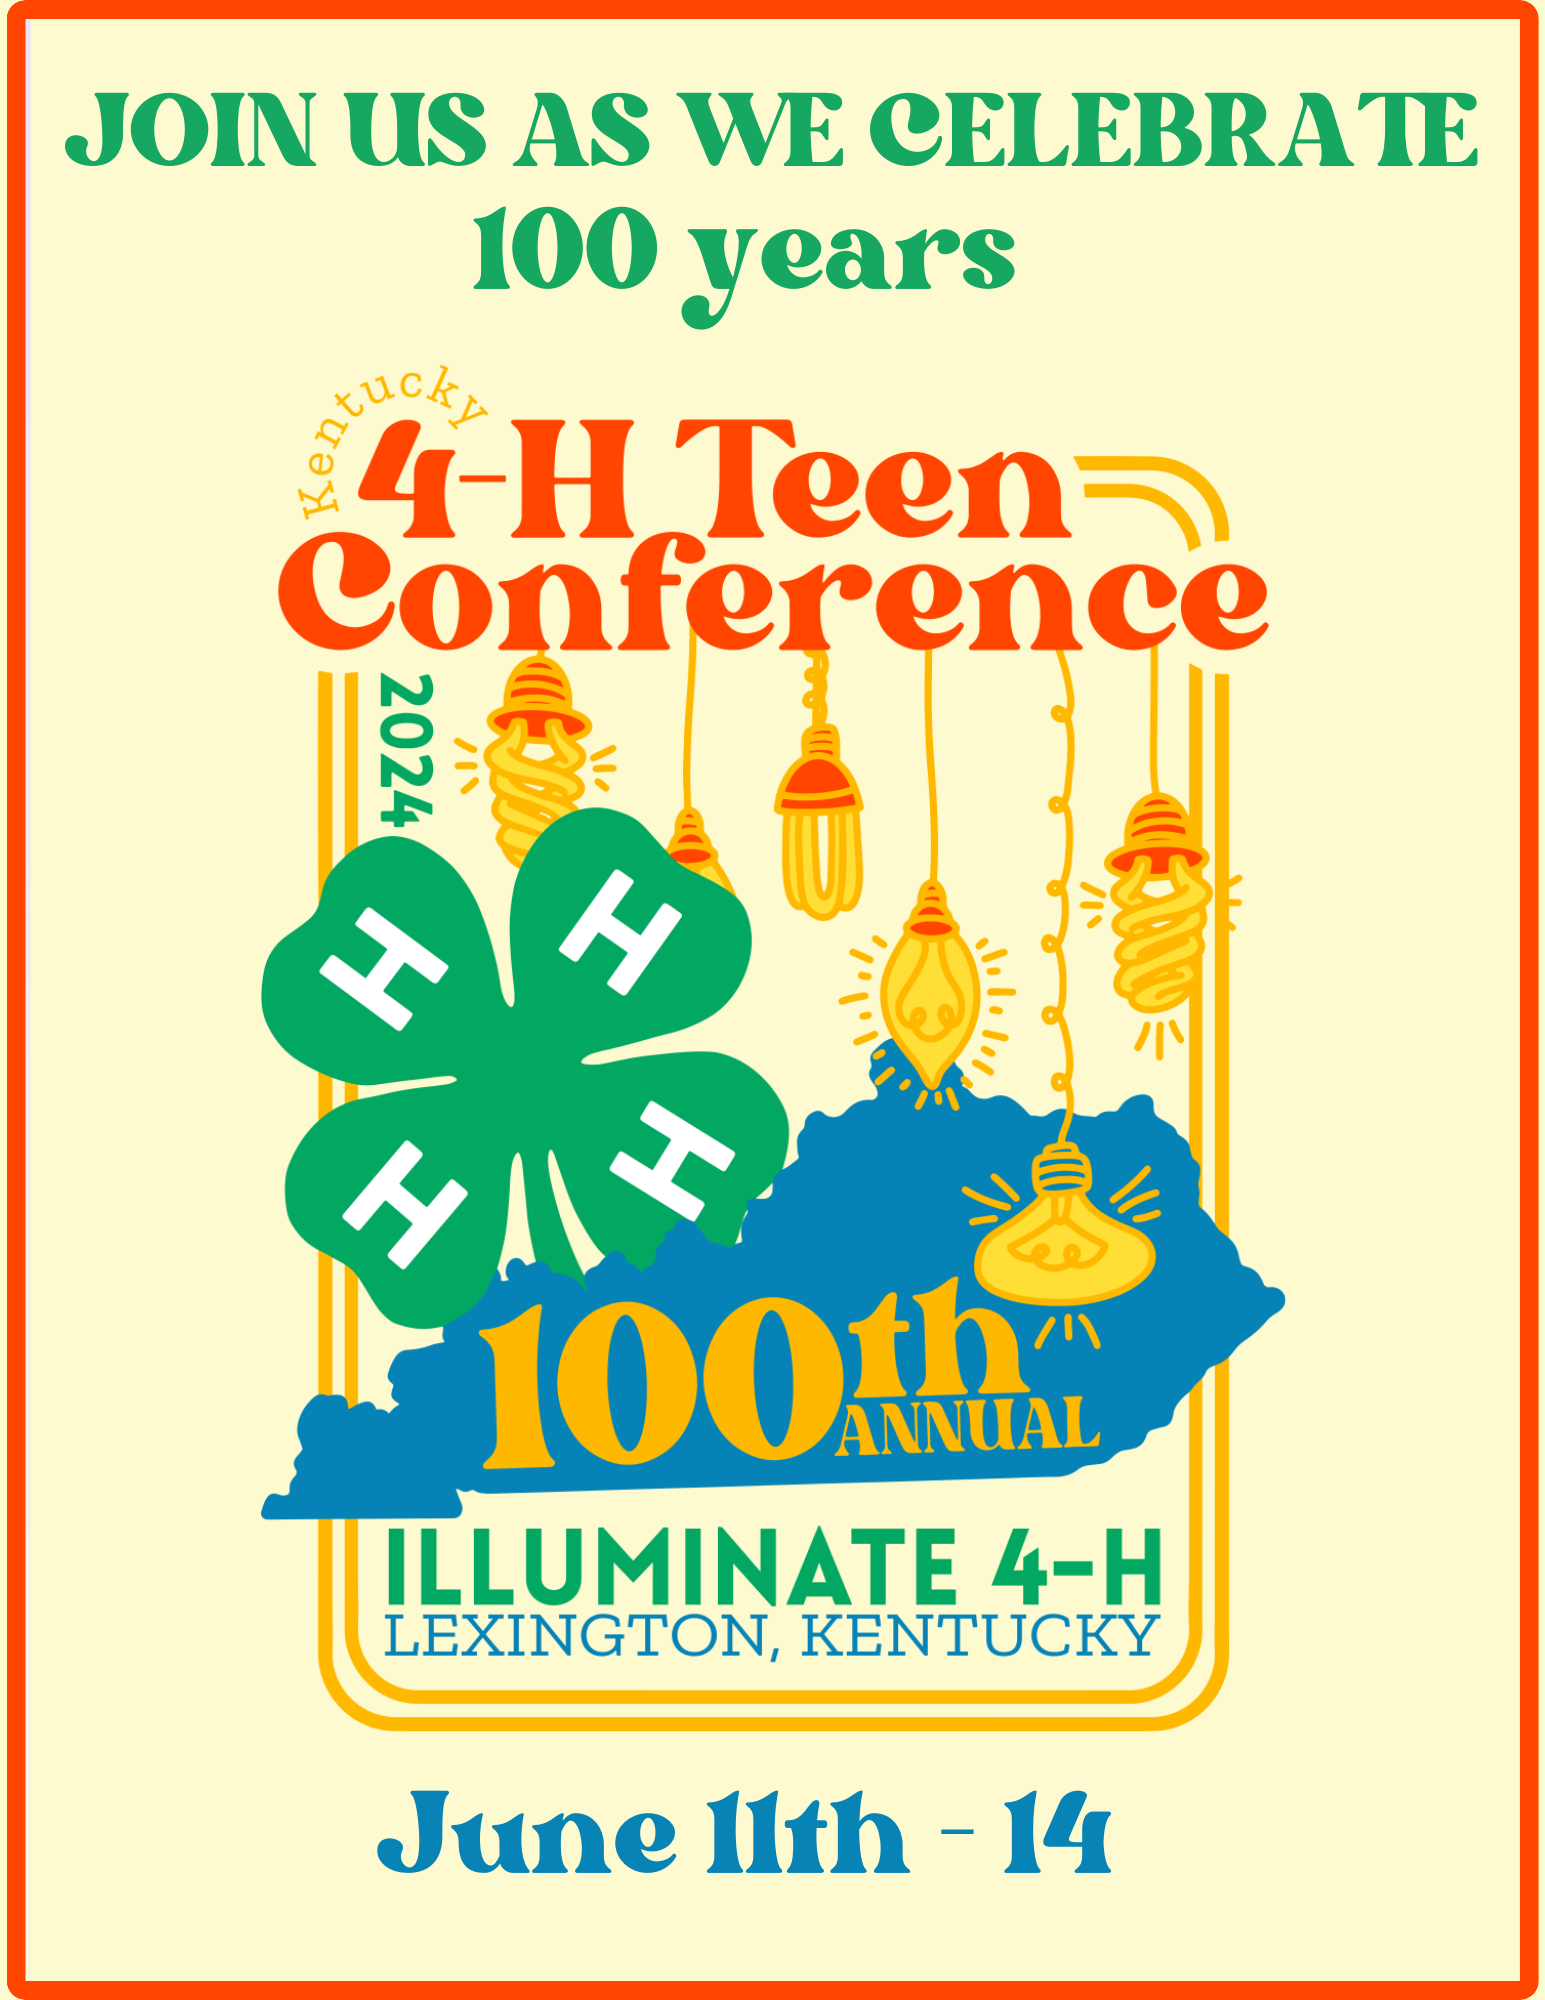  This year's conference theme is “Illuminate 4-H”. 